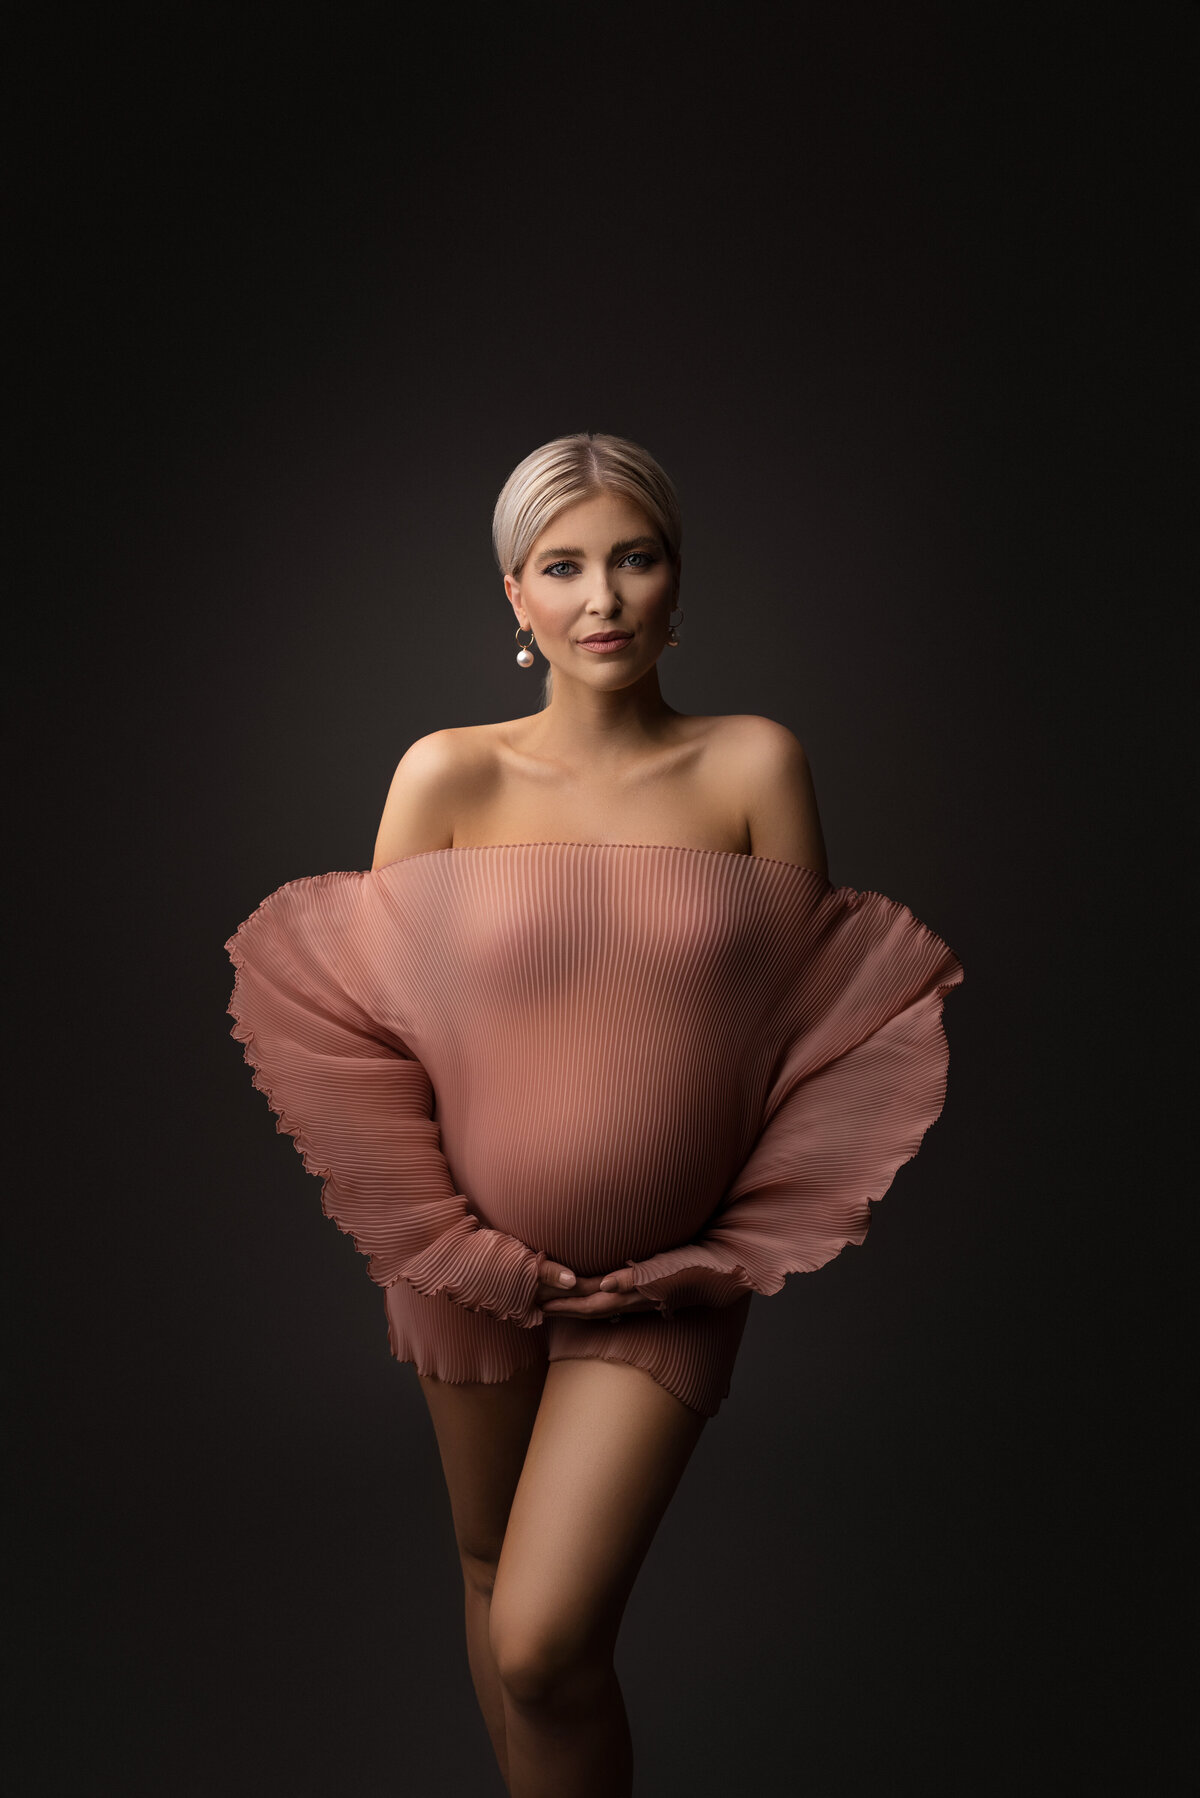 Woman poses for fine art maternity photos with New Jersey's best maternity photographer Katie Marshall. Woman is standing facing the camera in an off-the-shoulder dusty rose organza photoshoot mini dress with long, embellished sleeves. Her front knee is bent in front of her and both ands are resting gently underneath her baby bump.  The woman's hair is tied back in a low bun and has a closed mouth smile. The light is focused on the left half of her body, creating shadows and depth to her right.